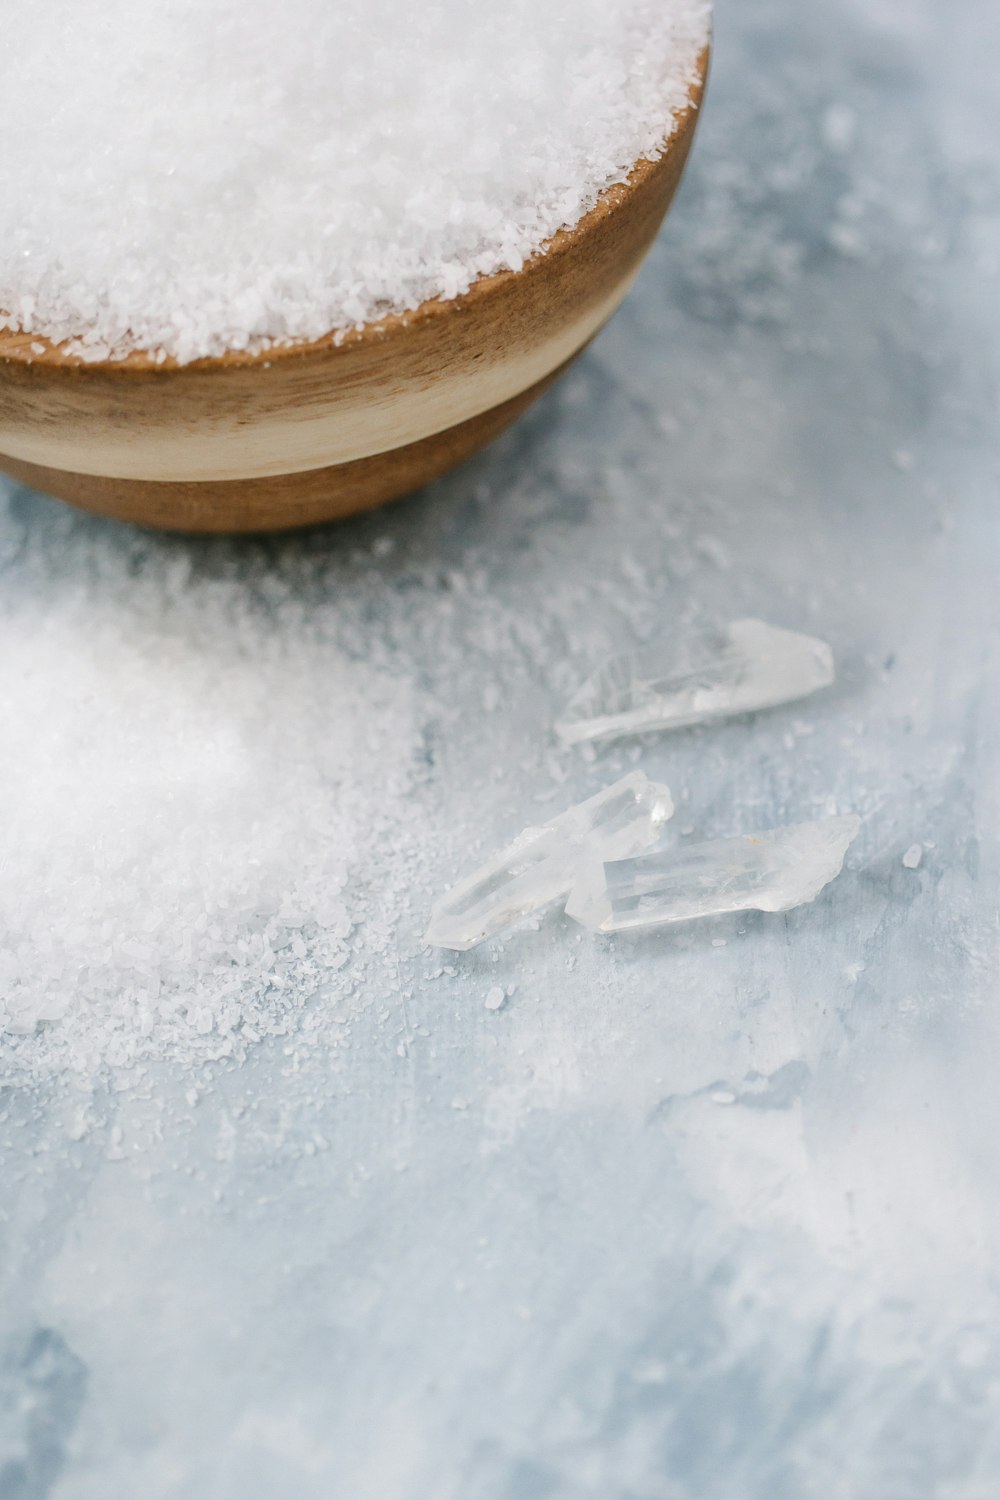 a wooden bowl filled with white powdered sugar